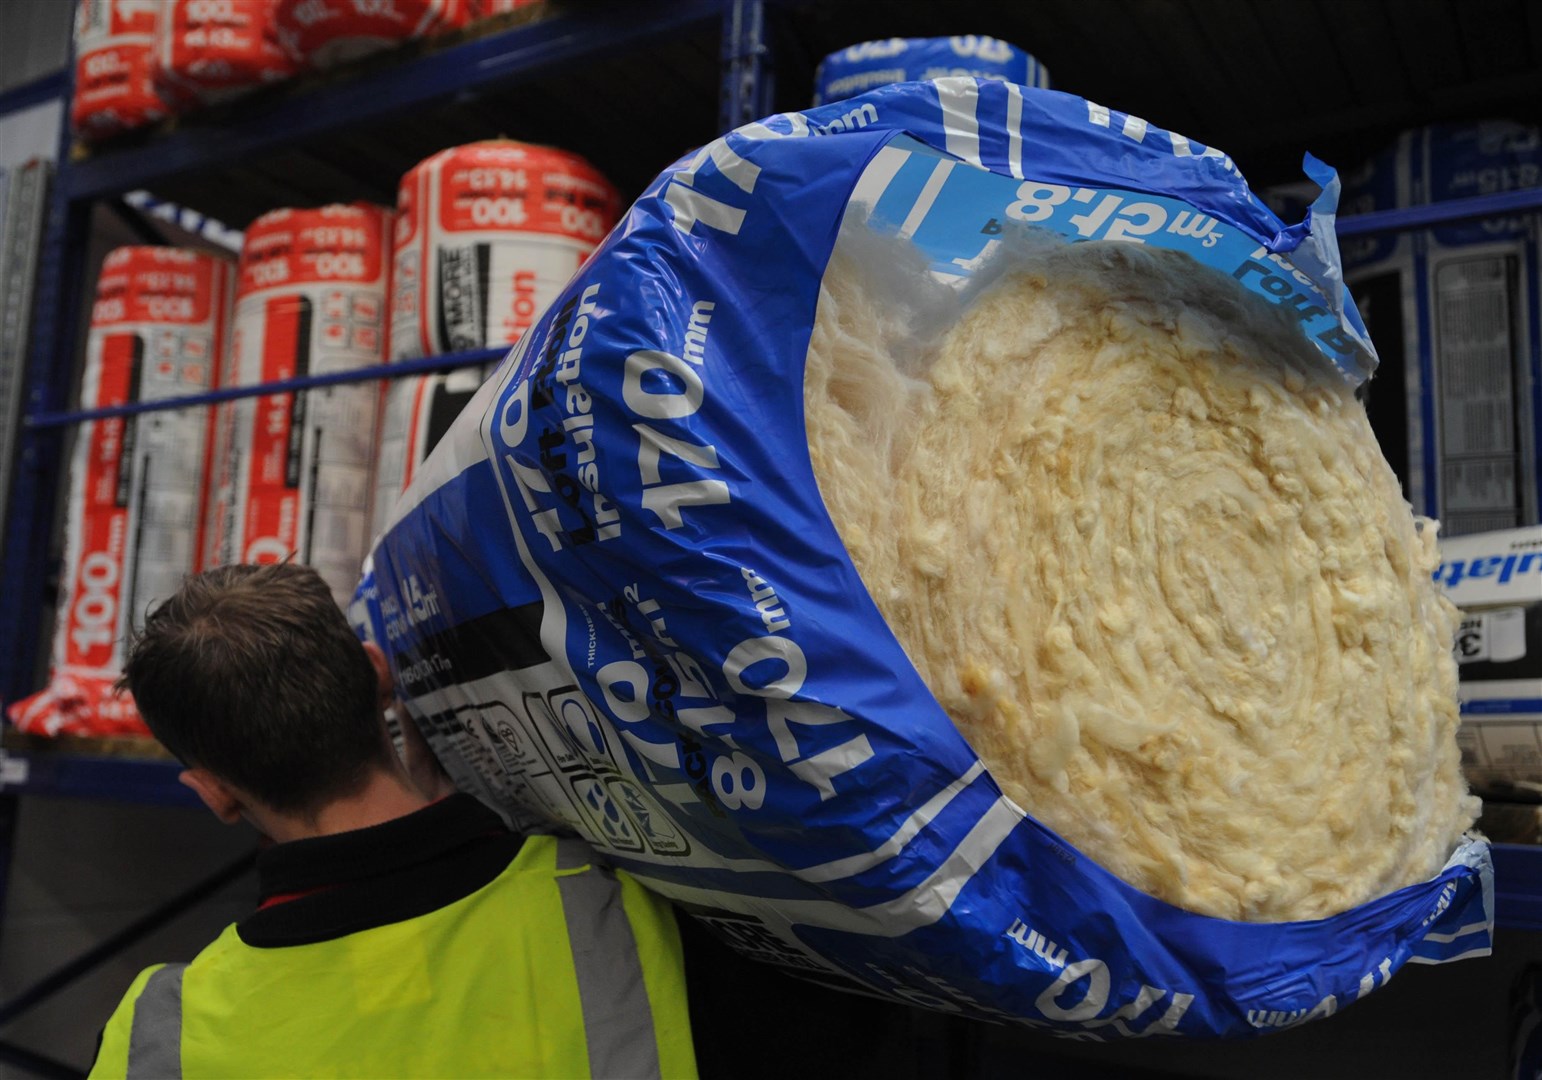 Advice and funding for insulation should be adequately publicised to ensure adoption, the CCC said (Barry Batchelor/PA)